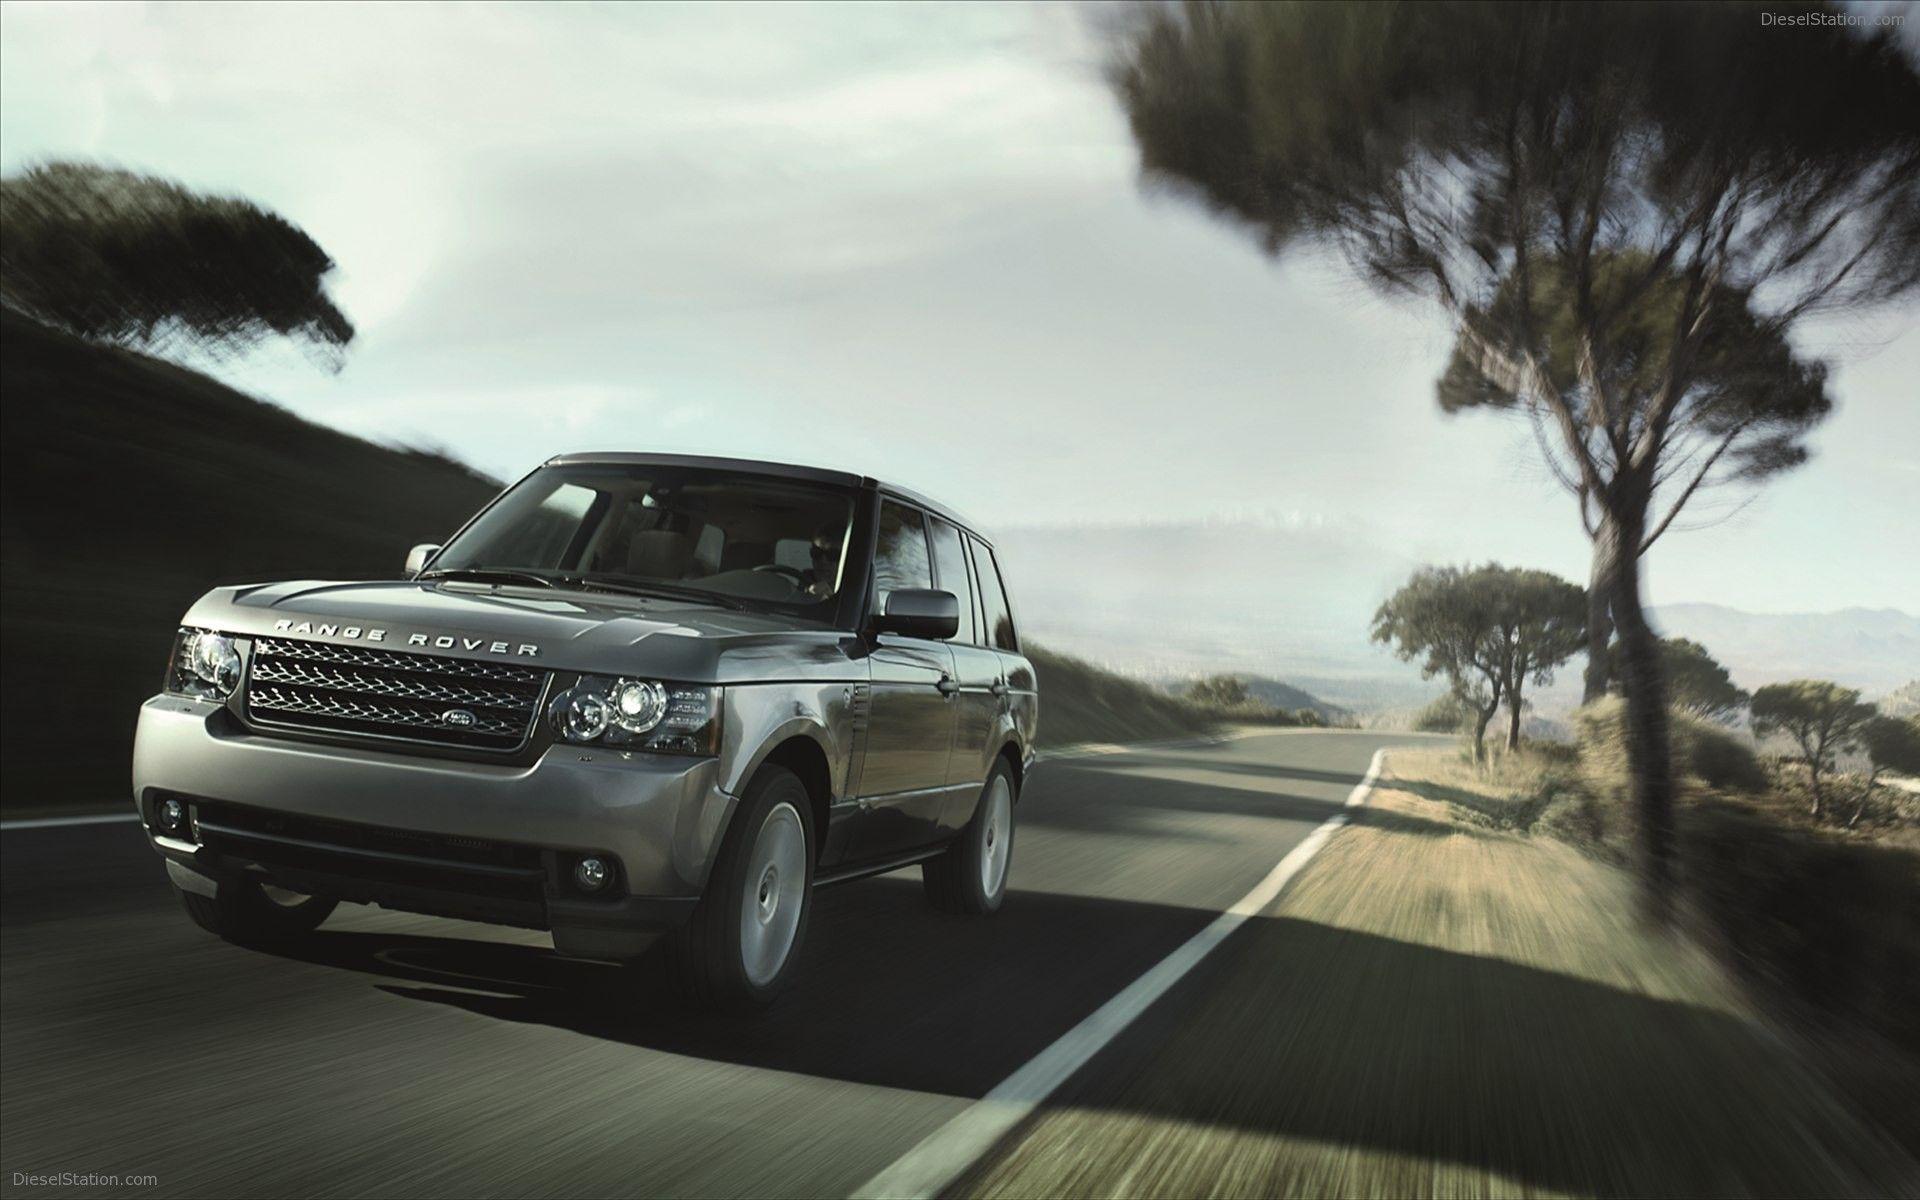 Range Rover Vogue 2012 Widescreen Exotic Car Picture of 18